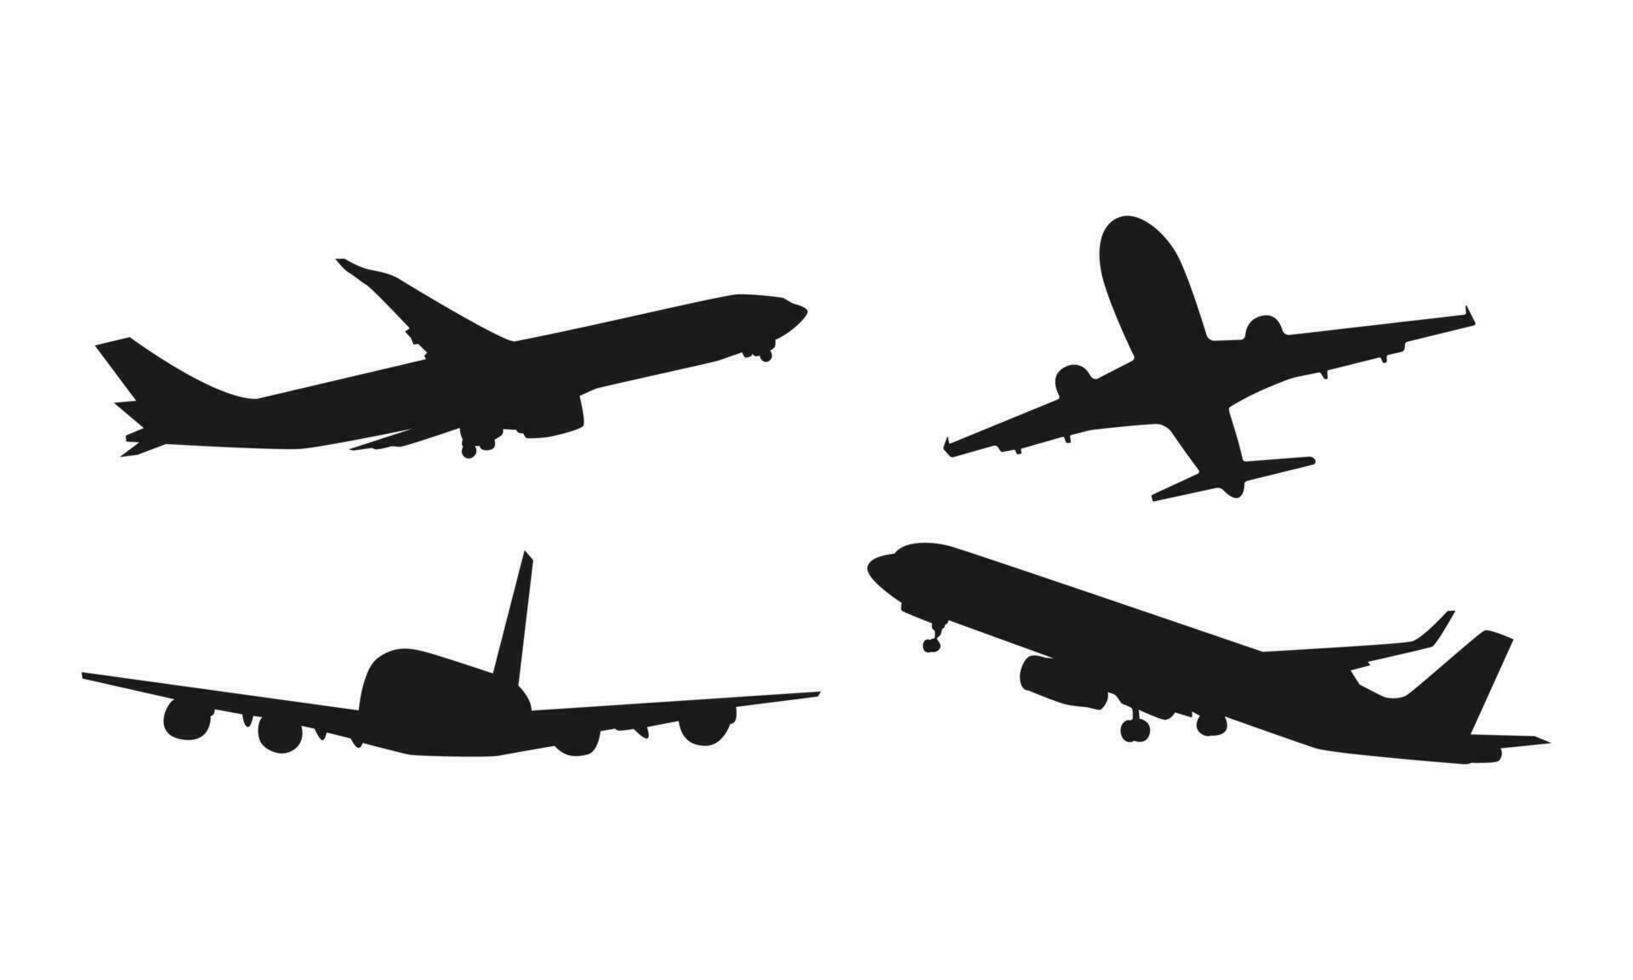 set of airplane silhouettes. isolated on white background. vector illustration.